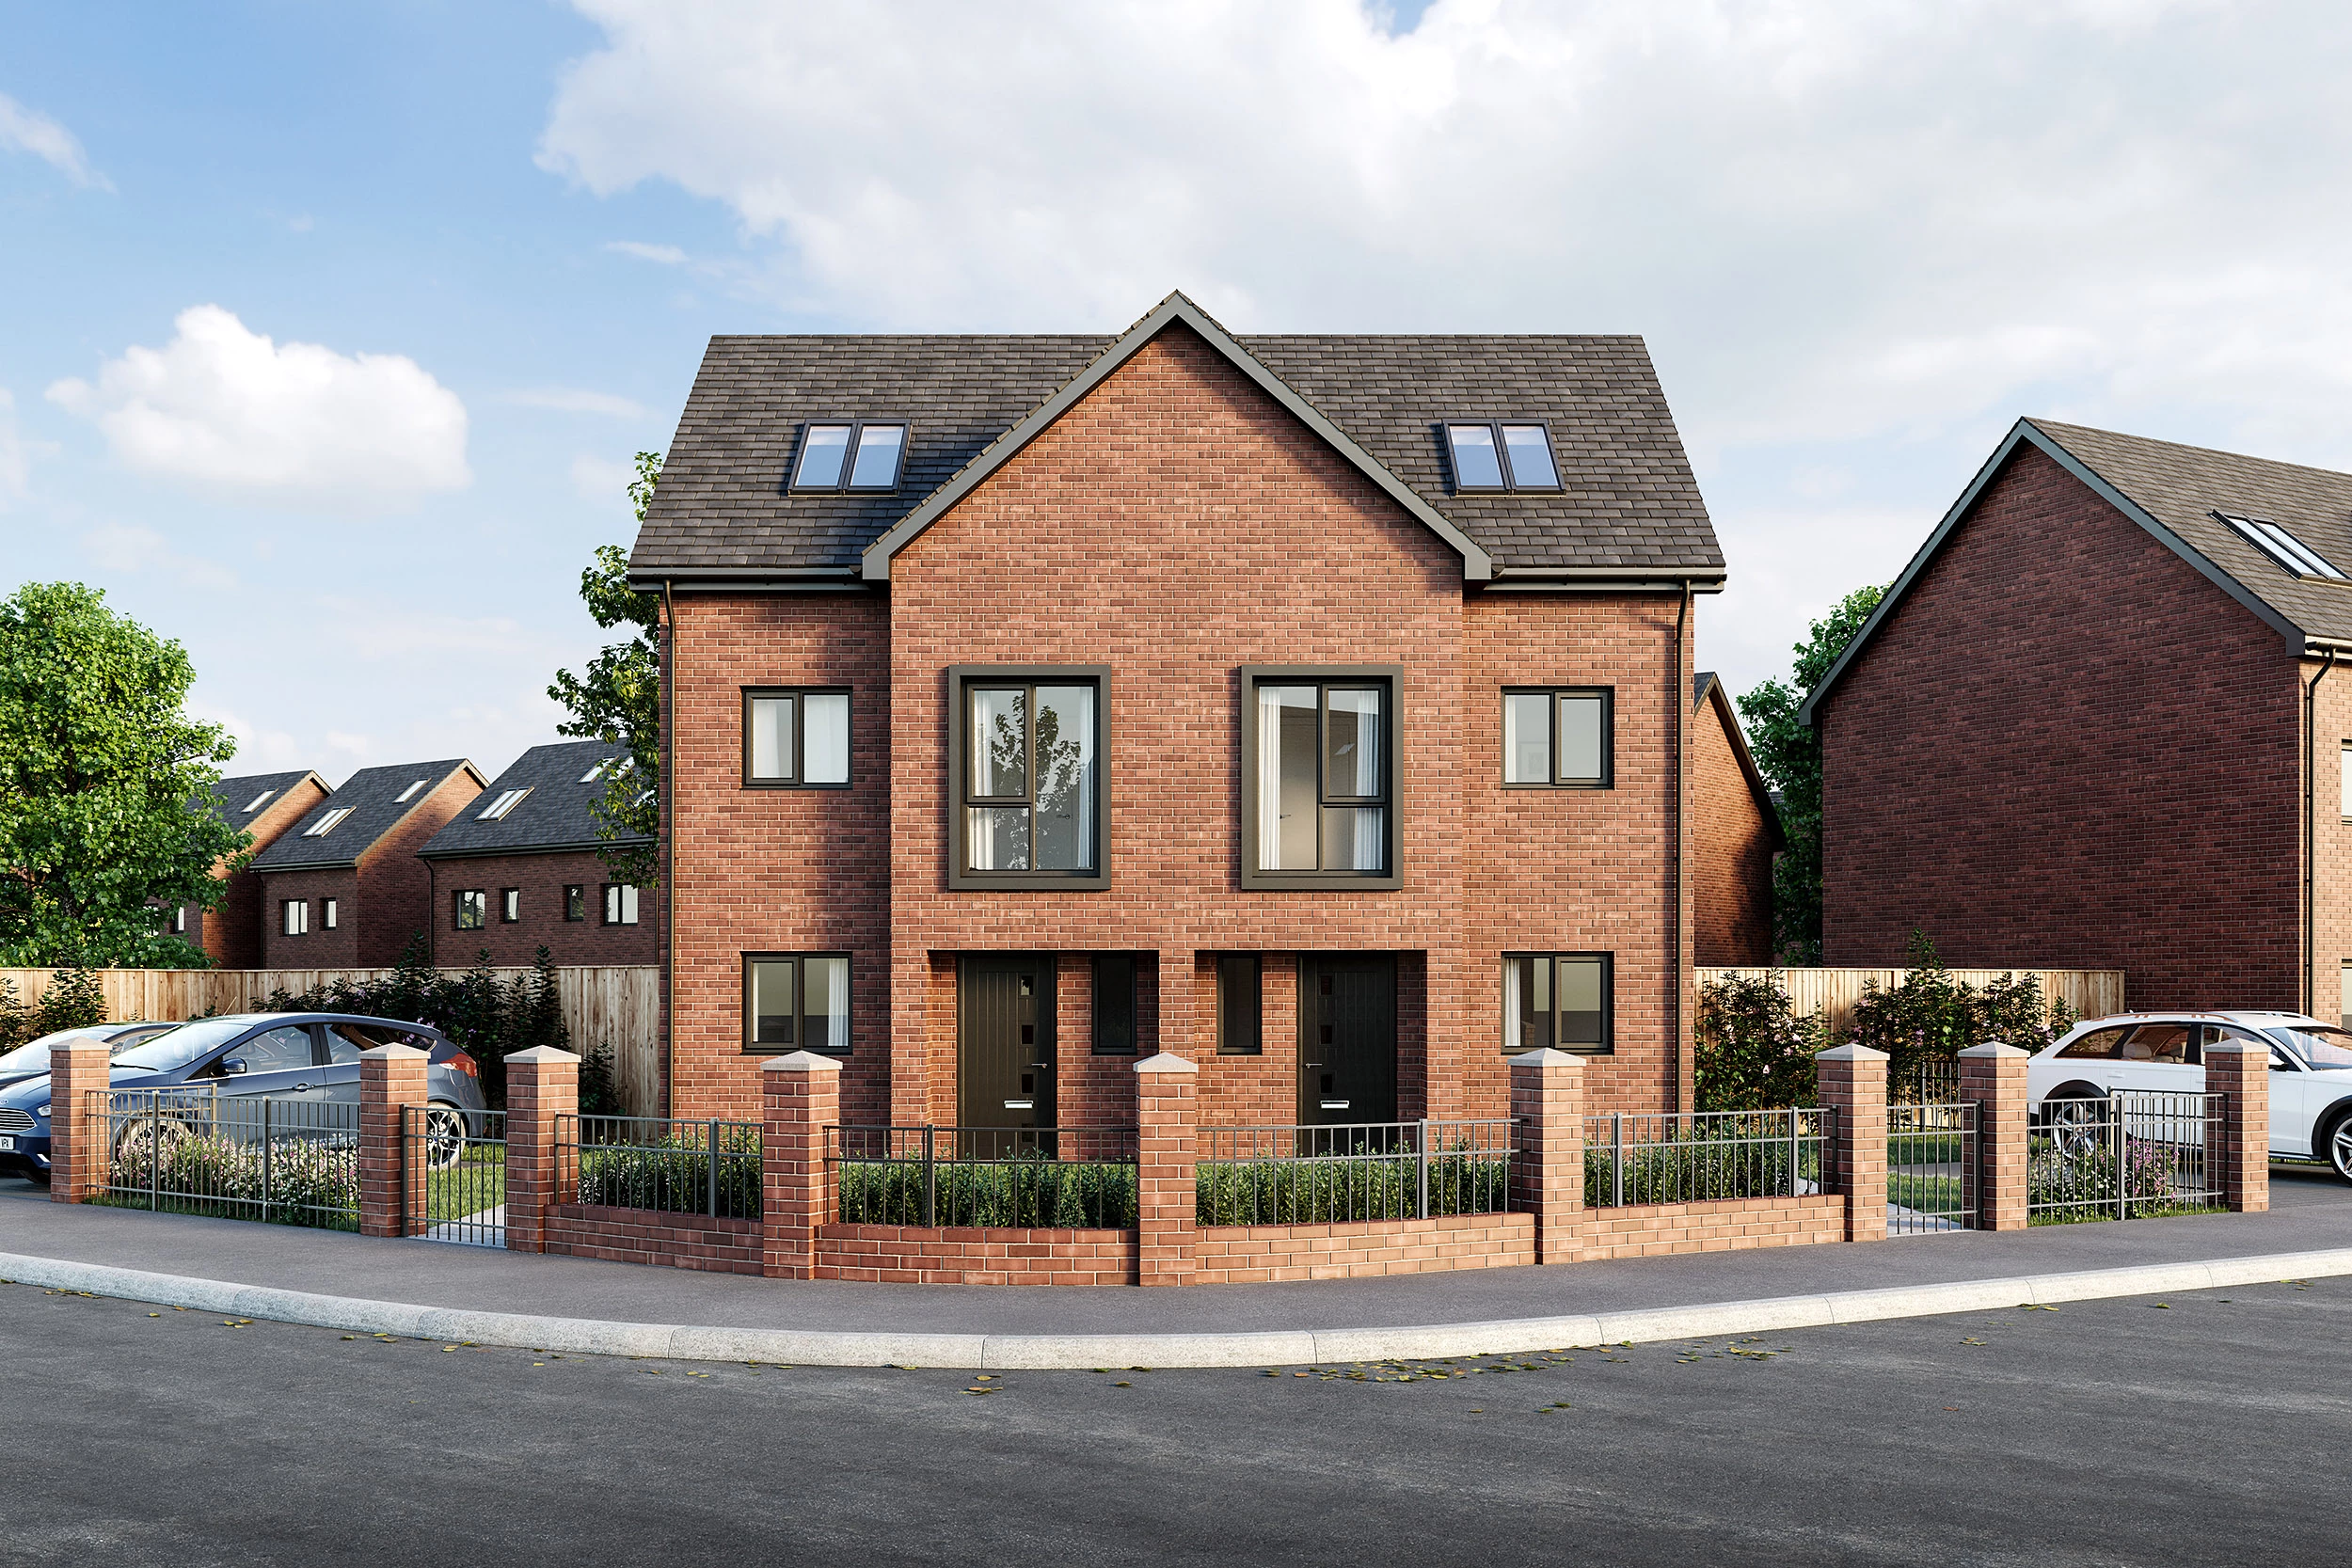 More homes will be released soon at the Poets development in Swinton under the Willo Homes brand